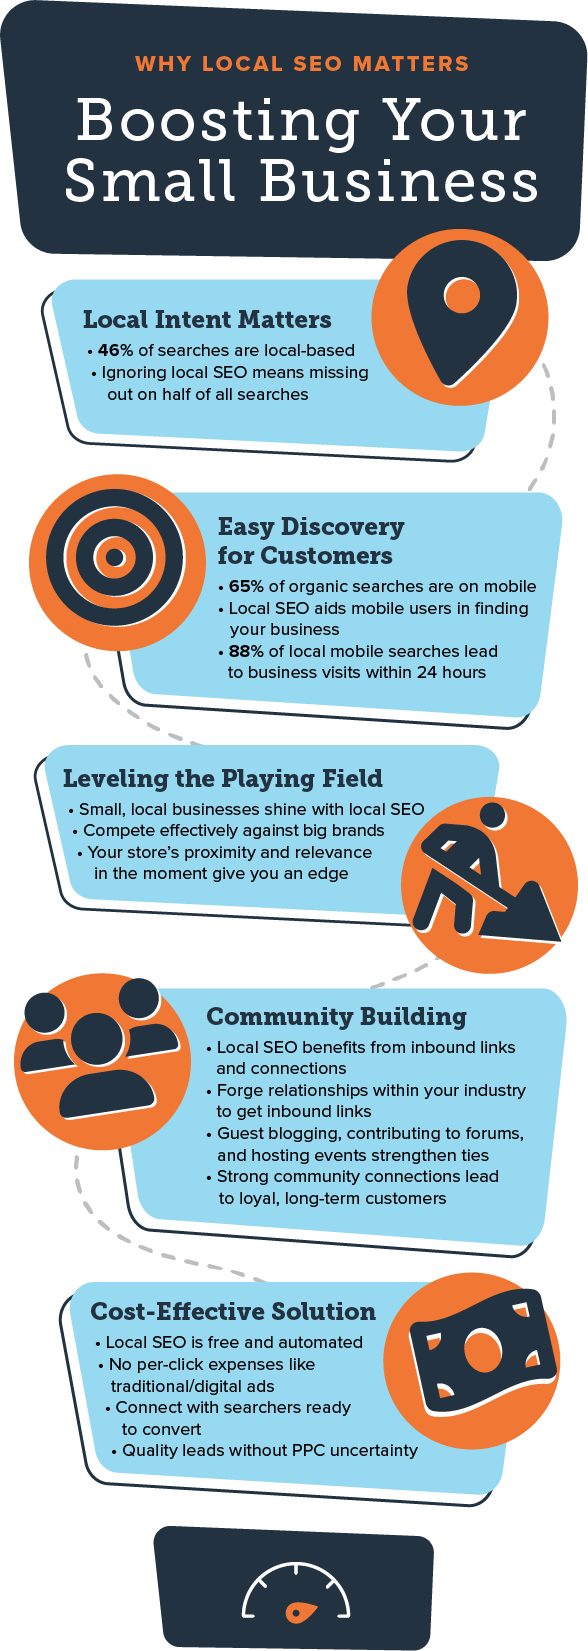 Infographic of why local SEO matters for businesses, including five main reasons like local intent matters, easy discovery for customers, leveling the playing field, community building, and cost